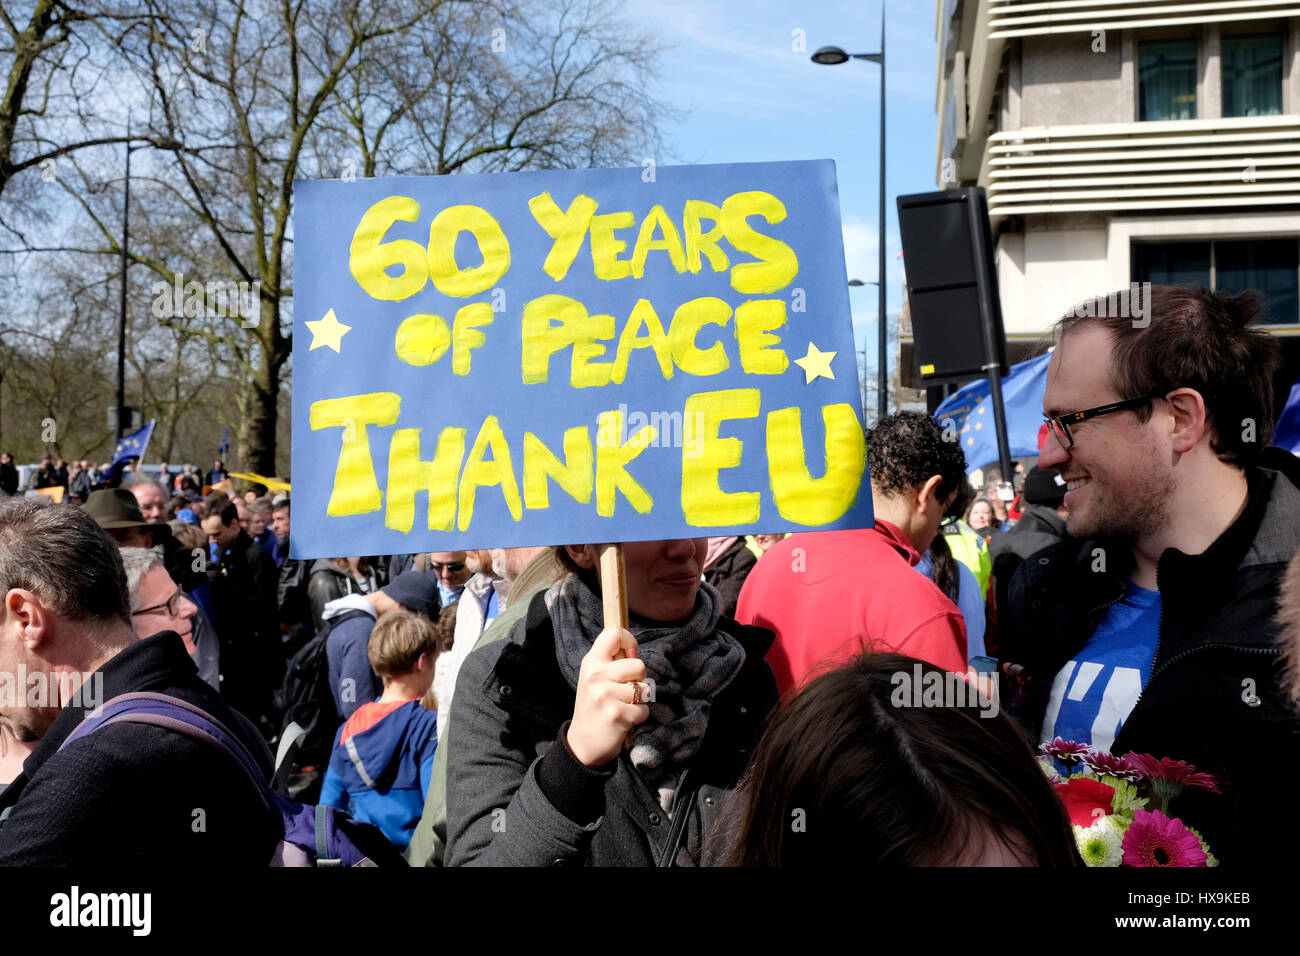 London, UK, 25th March 2017. Thousands of people protest in central London against Brexit, as Theresa May will trigger article 50 on 29 March. Credit: Yanice Idir / Alamy Live News Stock Photo